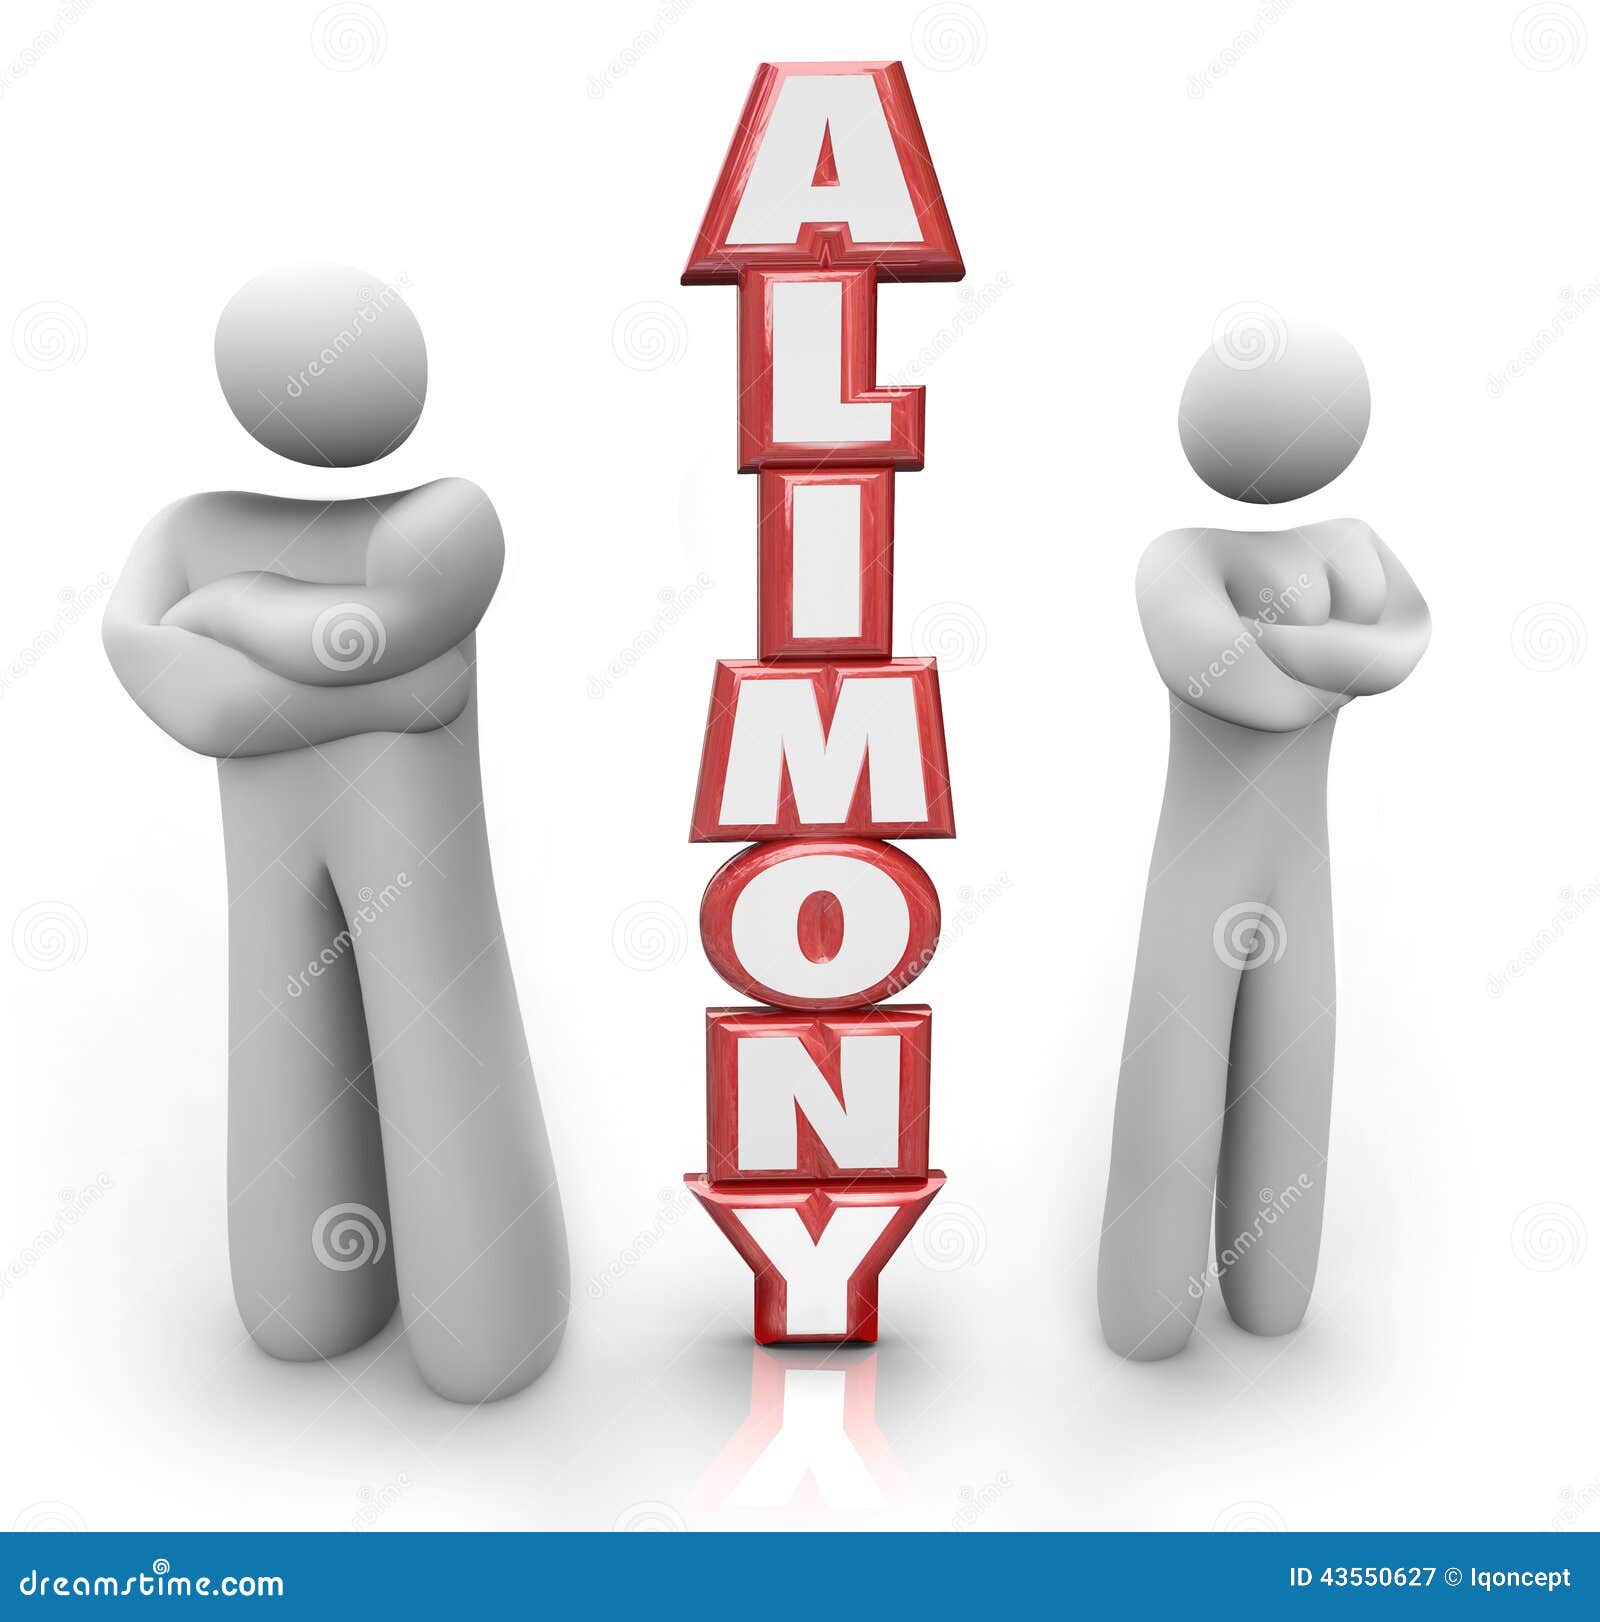 alimony 3d word divorced couple ex husband wife